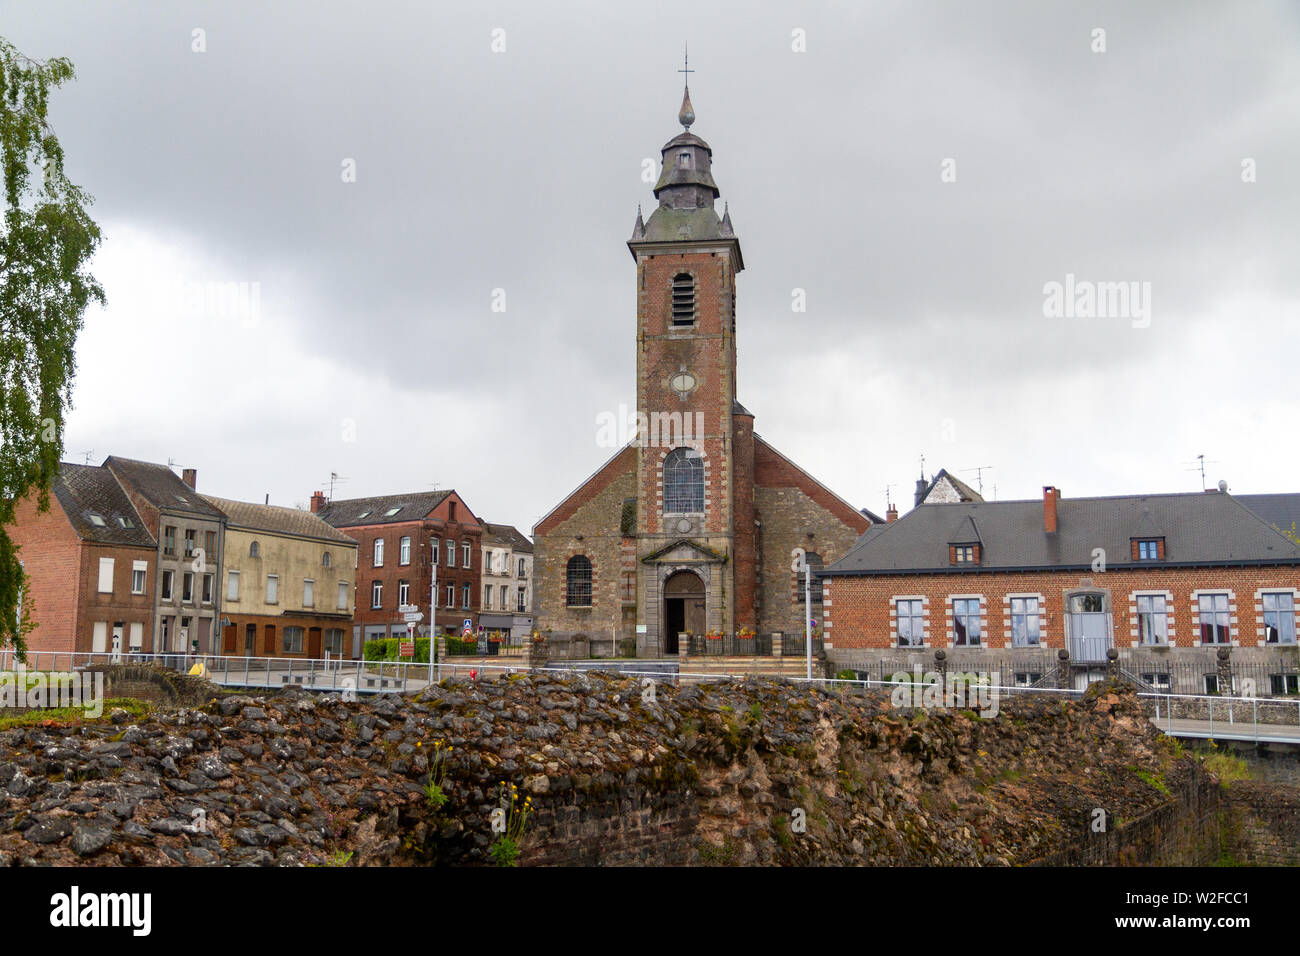 Eglise Notre-Dame de l’assomption (Curch of Our Lady of the Assumption) in Bavay, France. Shot in May 2019. Stock Photo